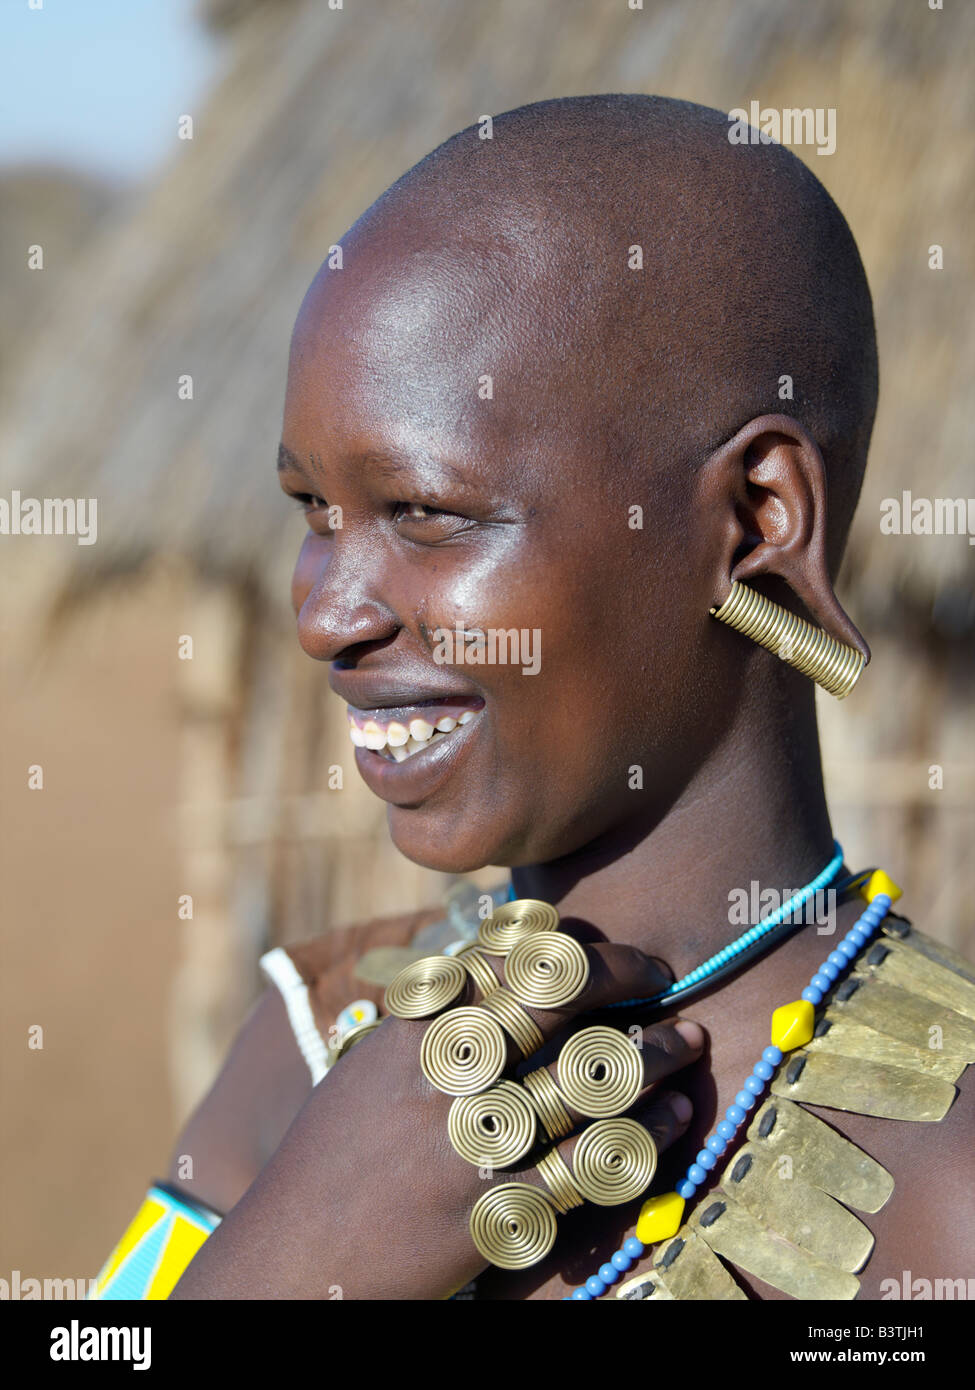 Tanzania, Northern Tanzania, Balangida Lelu. A Datoga woman in jovial mood. The traditional attire of Datoga women includes beautifully tanned and decorated leather dresses and coiled brass armbands, necklaces, earrings and rings. Yellow and light blue are the preferred colours of the beads they wear. Scarification of the face is not uncommon among women and girls.The Datoga (known to their Maasai neighbours as the Mang'ati and to the Iraqw as Babaraig) live in northern Tanzania and are primarily pastoralists. Stock Photo